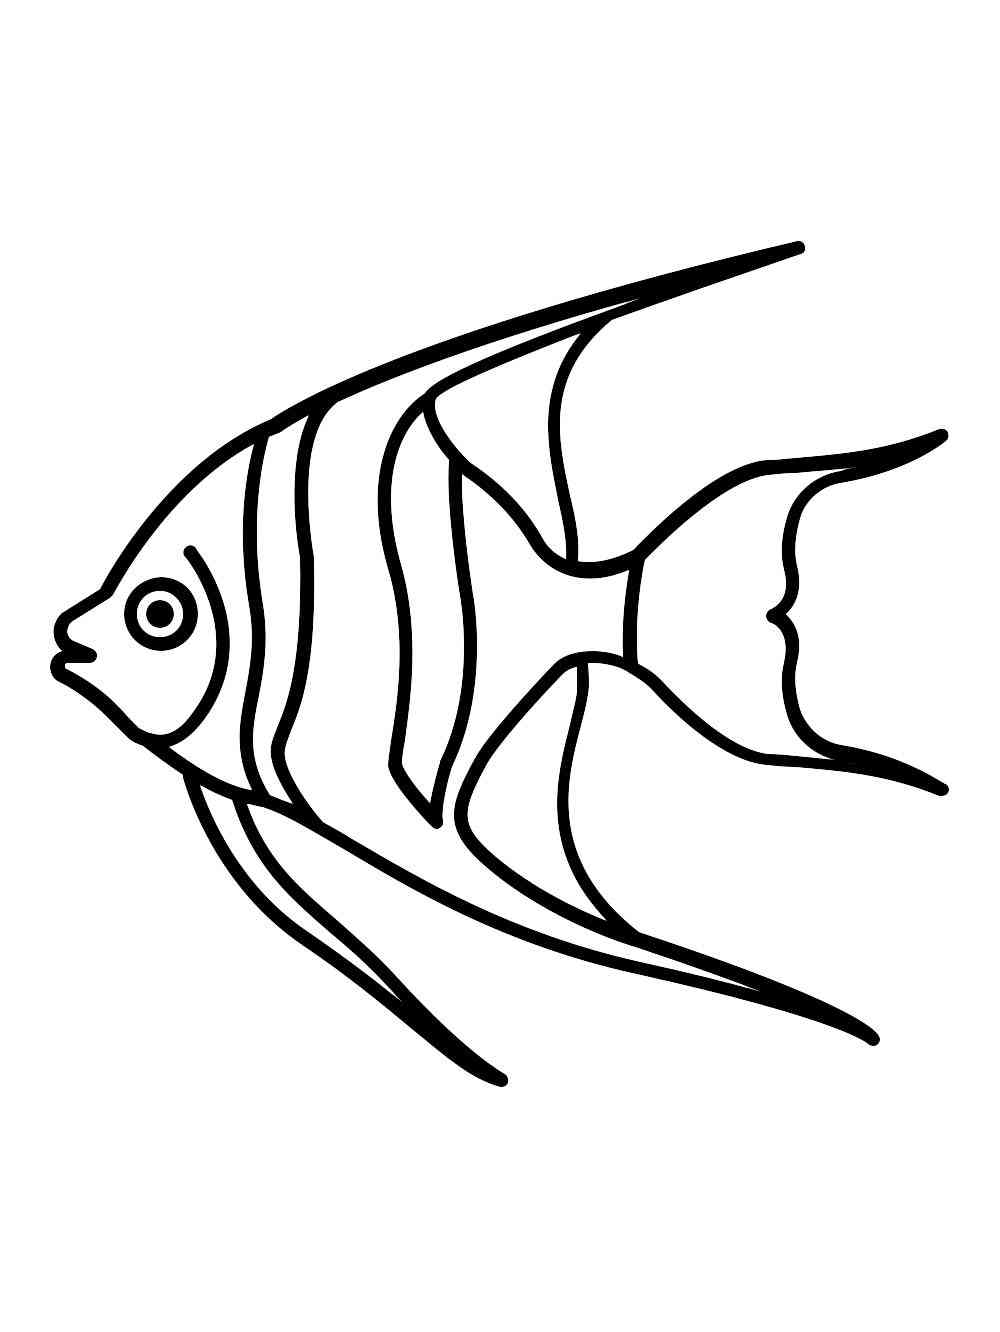 Angelfish 15 coloring page